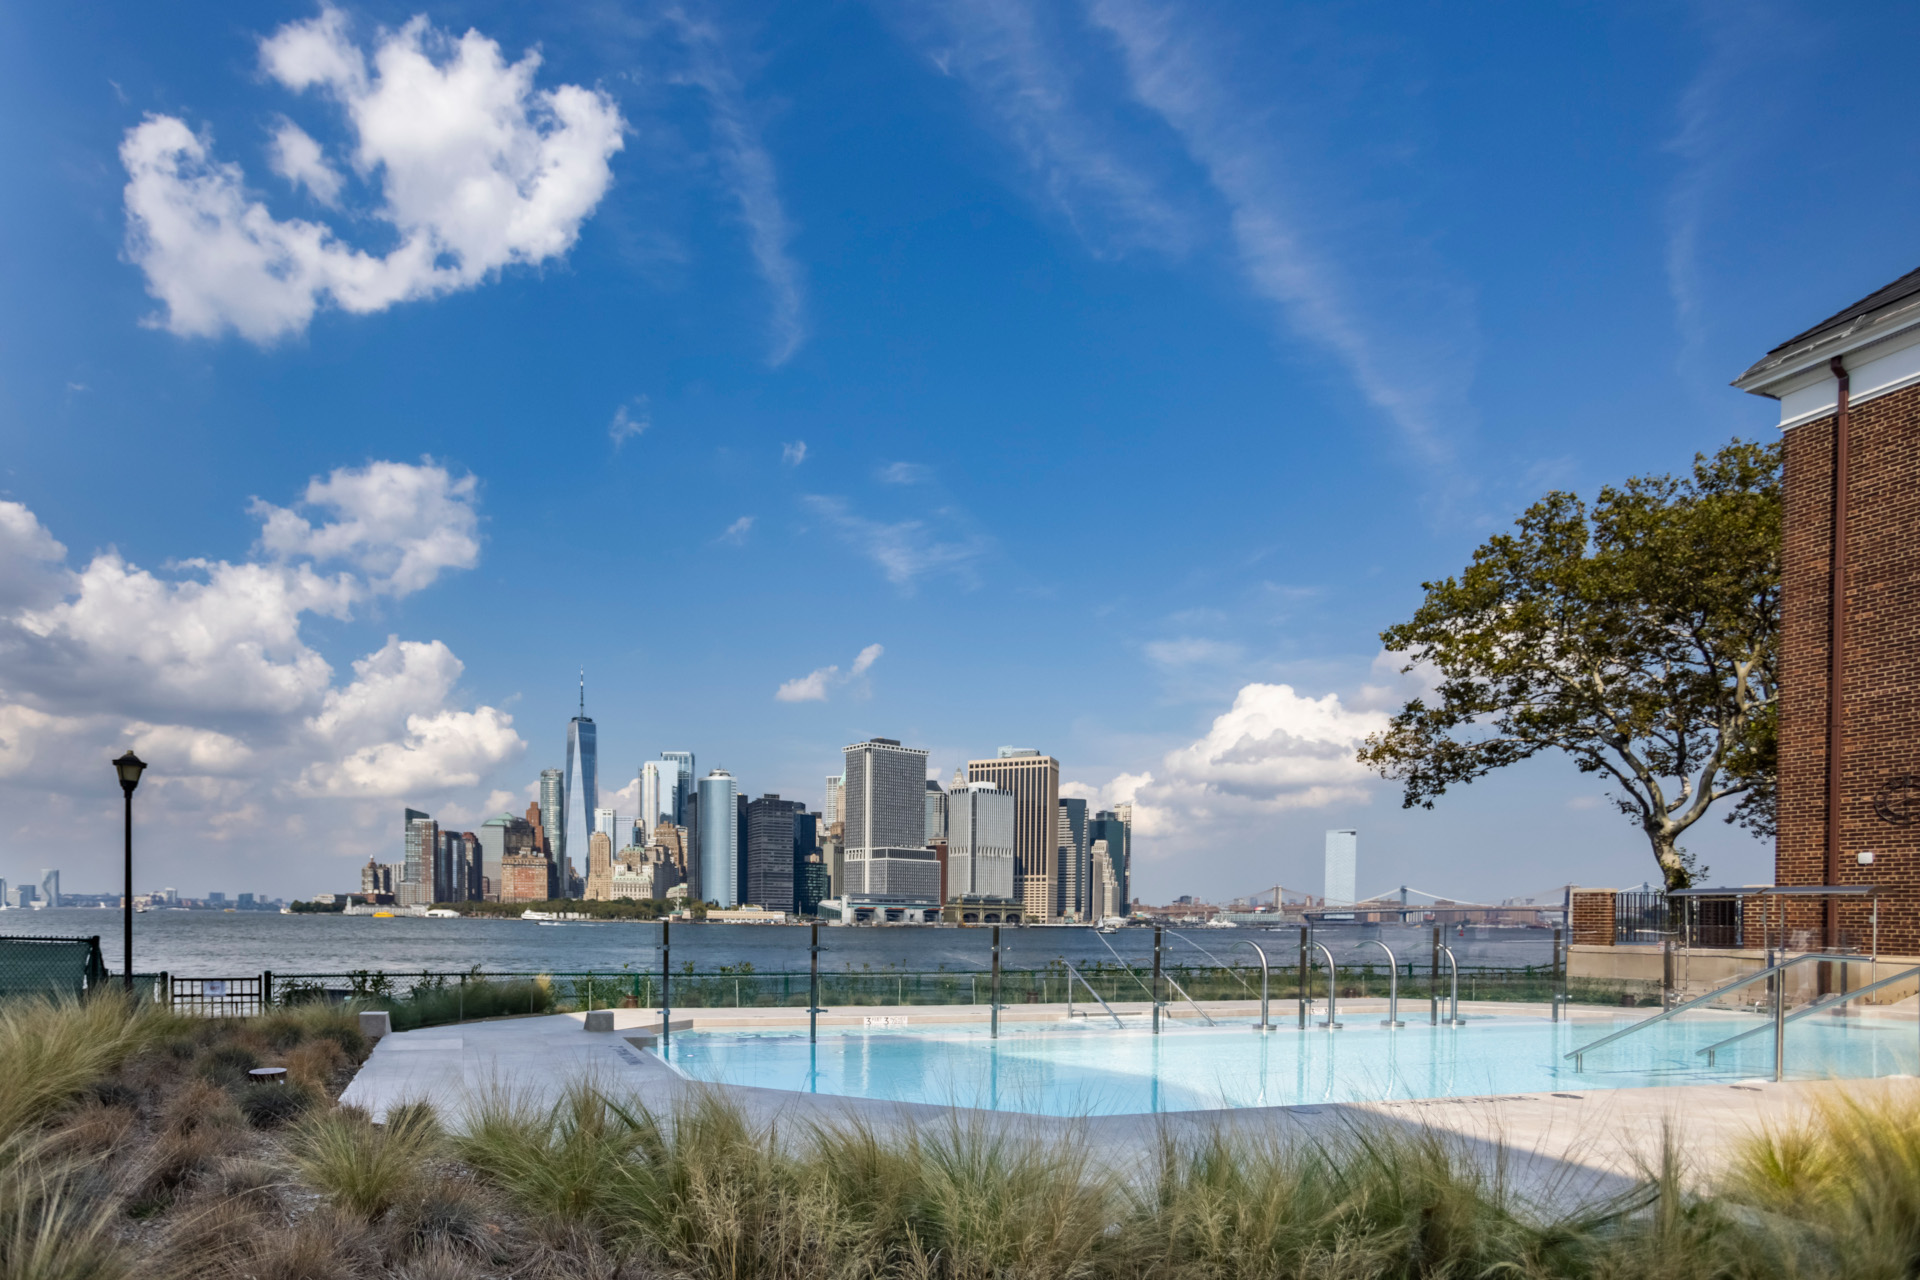 View of New York City from a pool